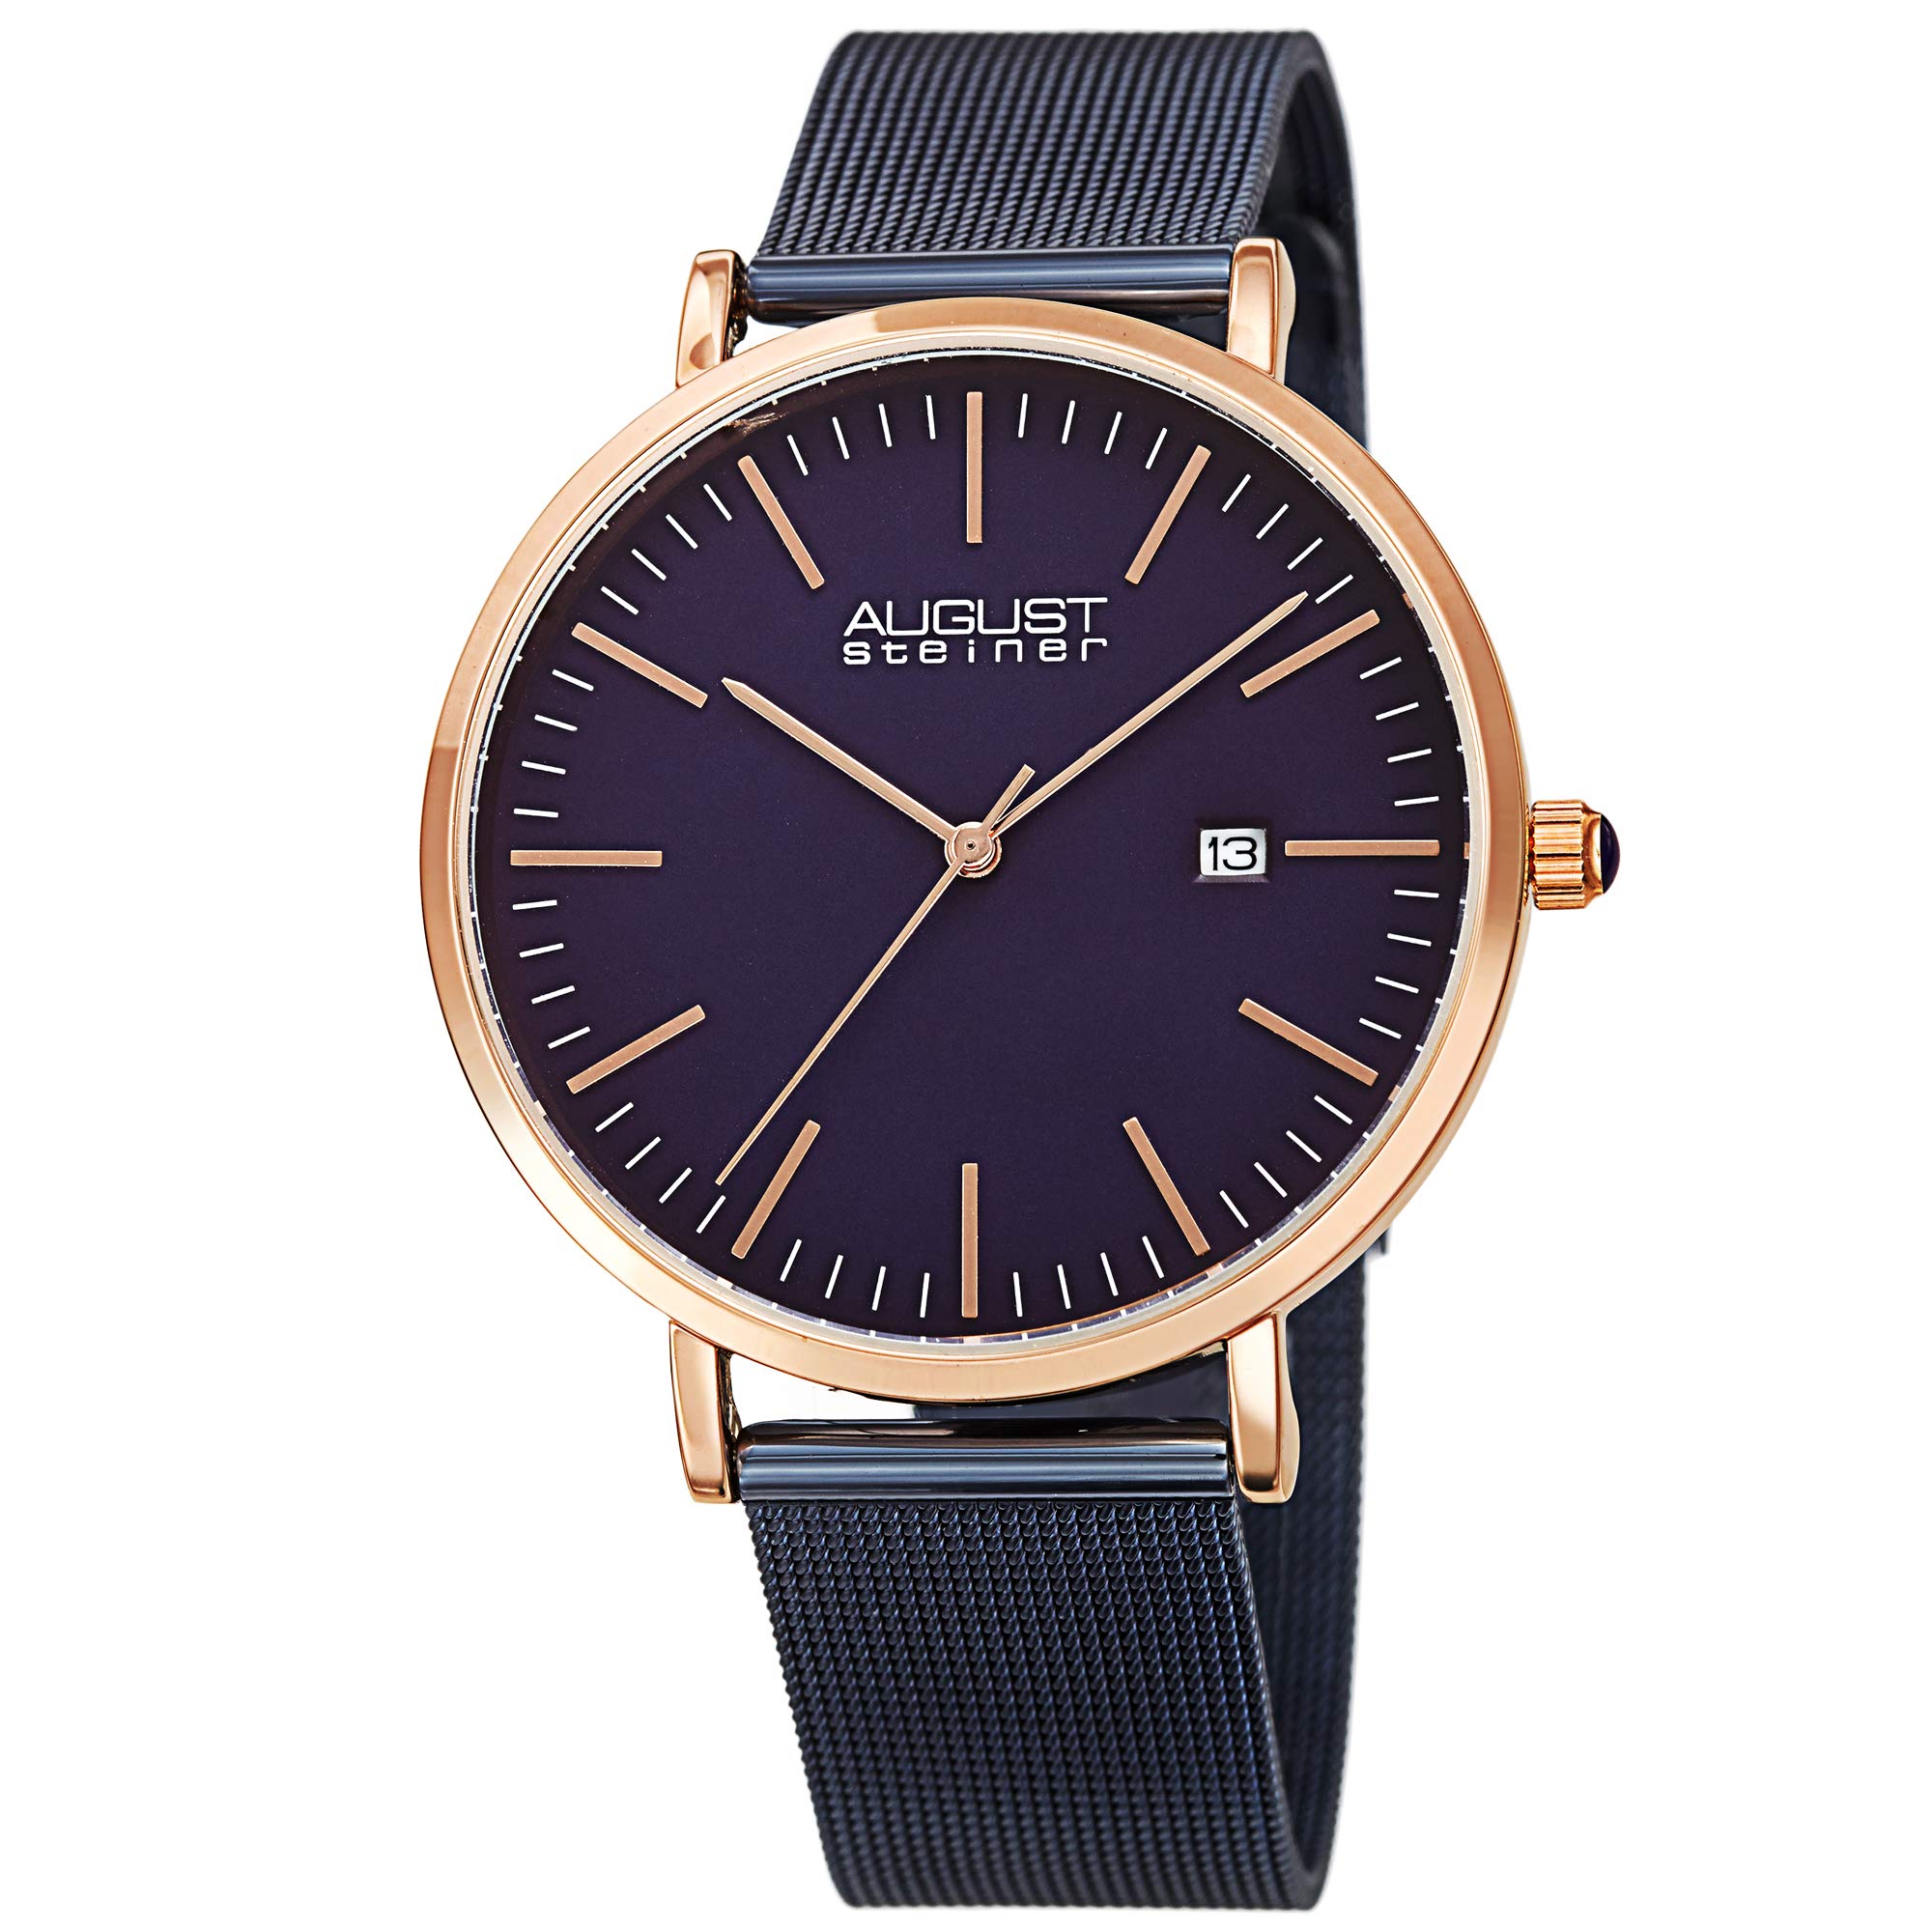 August Steiner Men's Classic Watch - Simple and Elegant Every Day Timepiece with Date Window On Stainless Steel Mesh Bracelet - AS8283